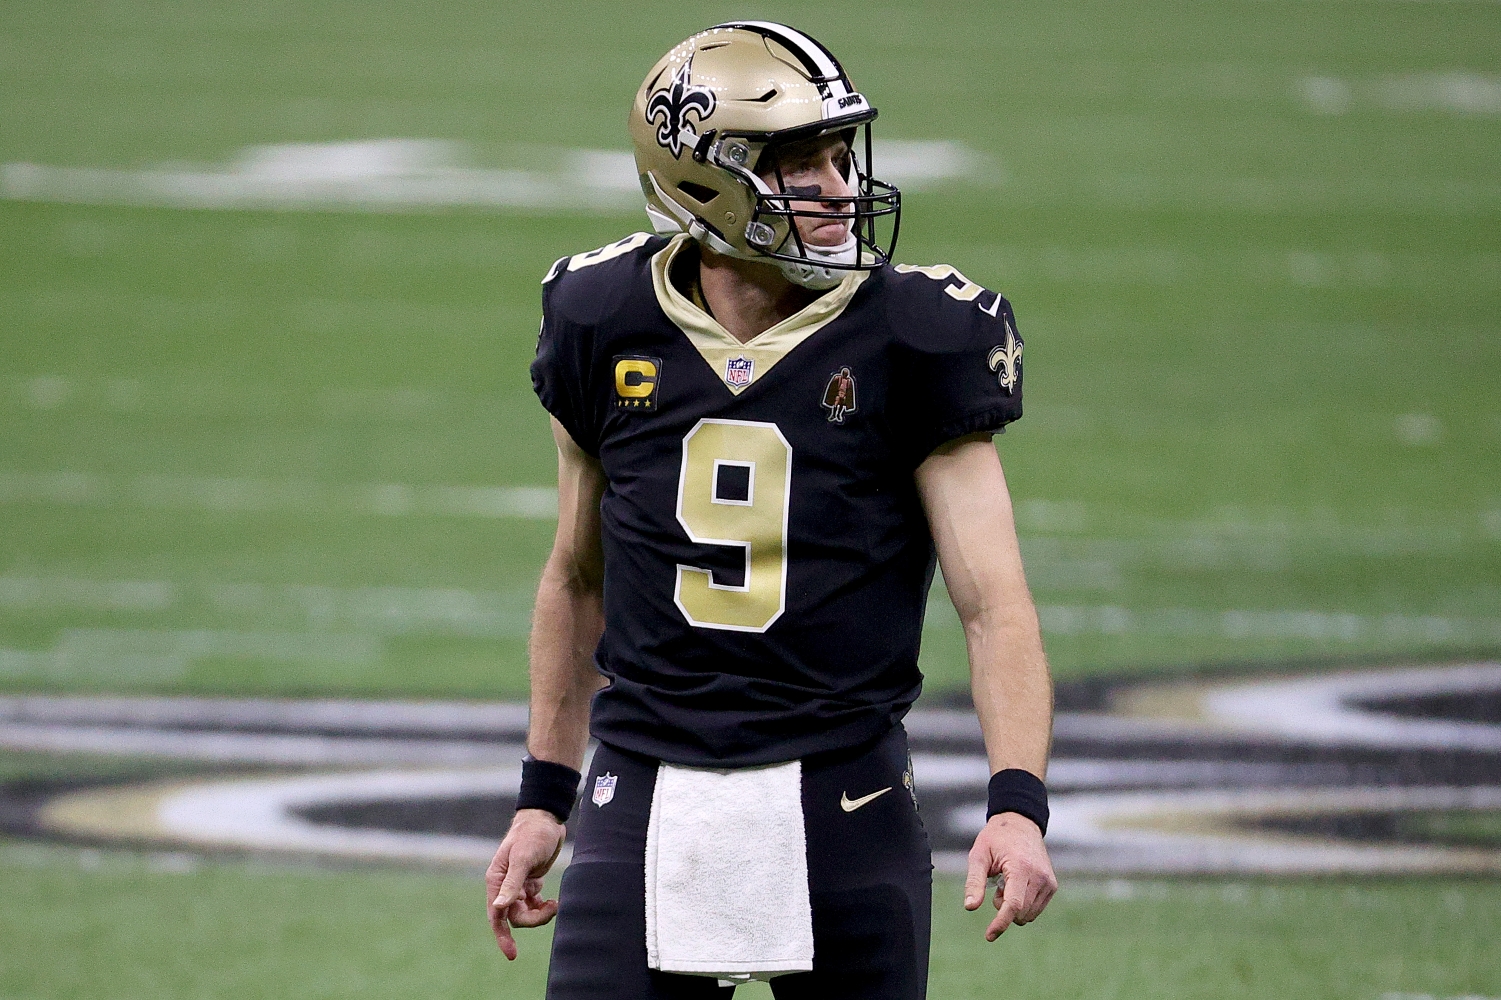 Drew Brees Gets Brutally Honest About Making an NFL Comeback: ‘I Actually Feel Worse Now Than at Any Point in My Career’